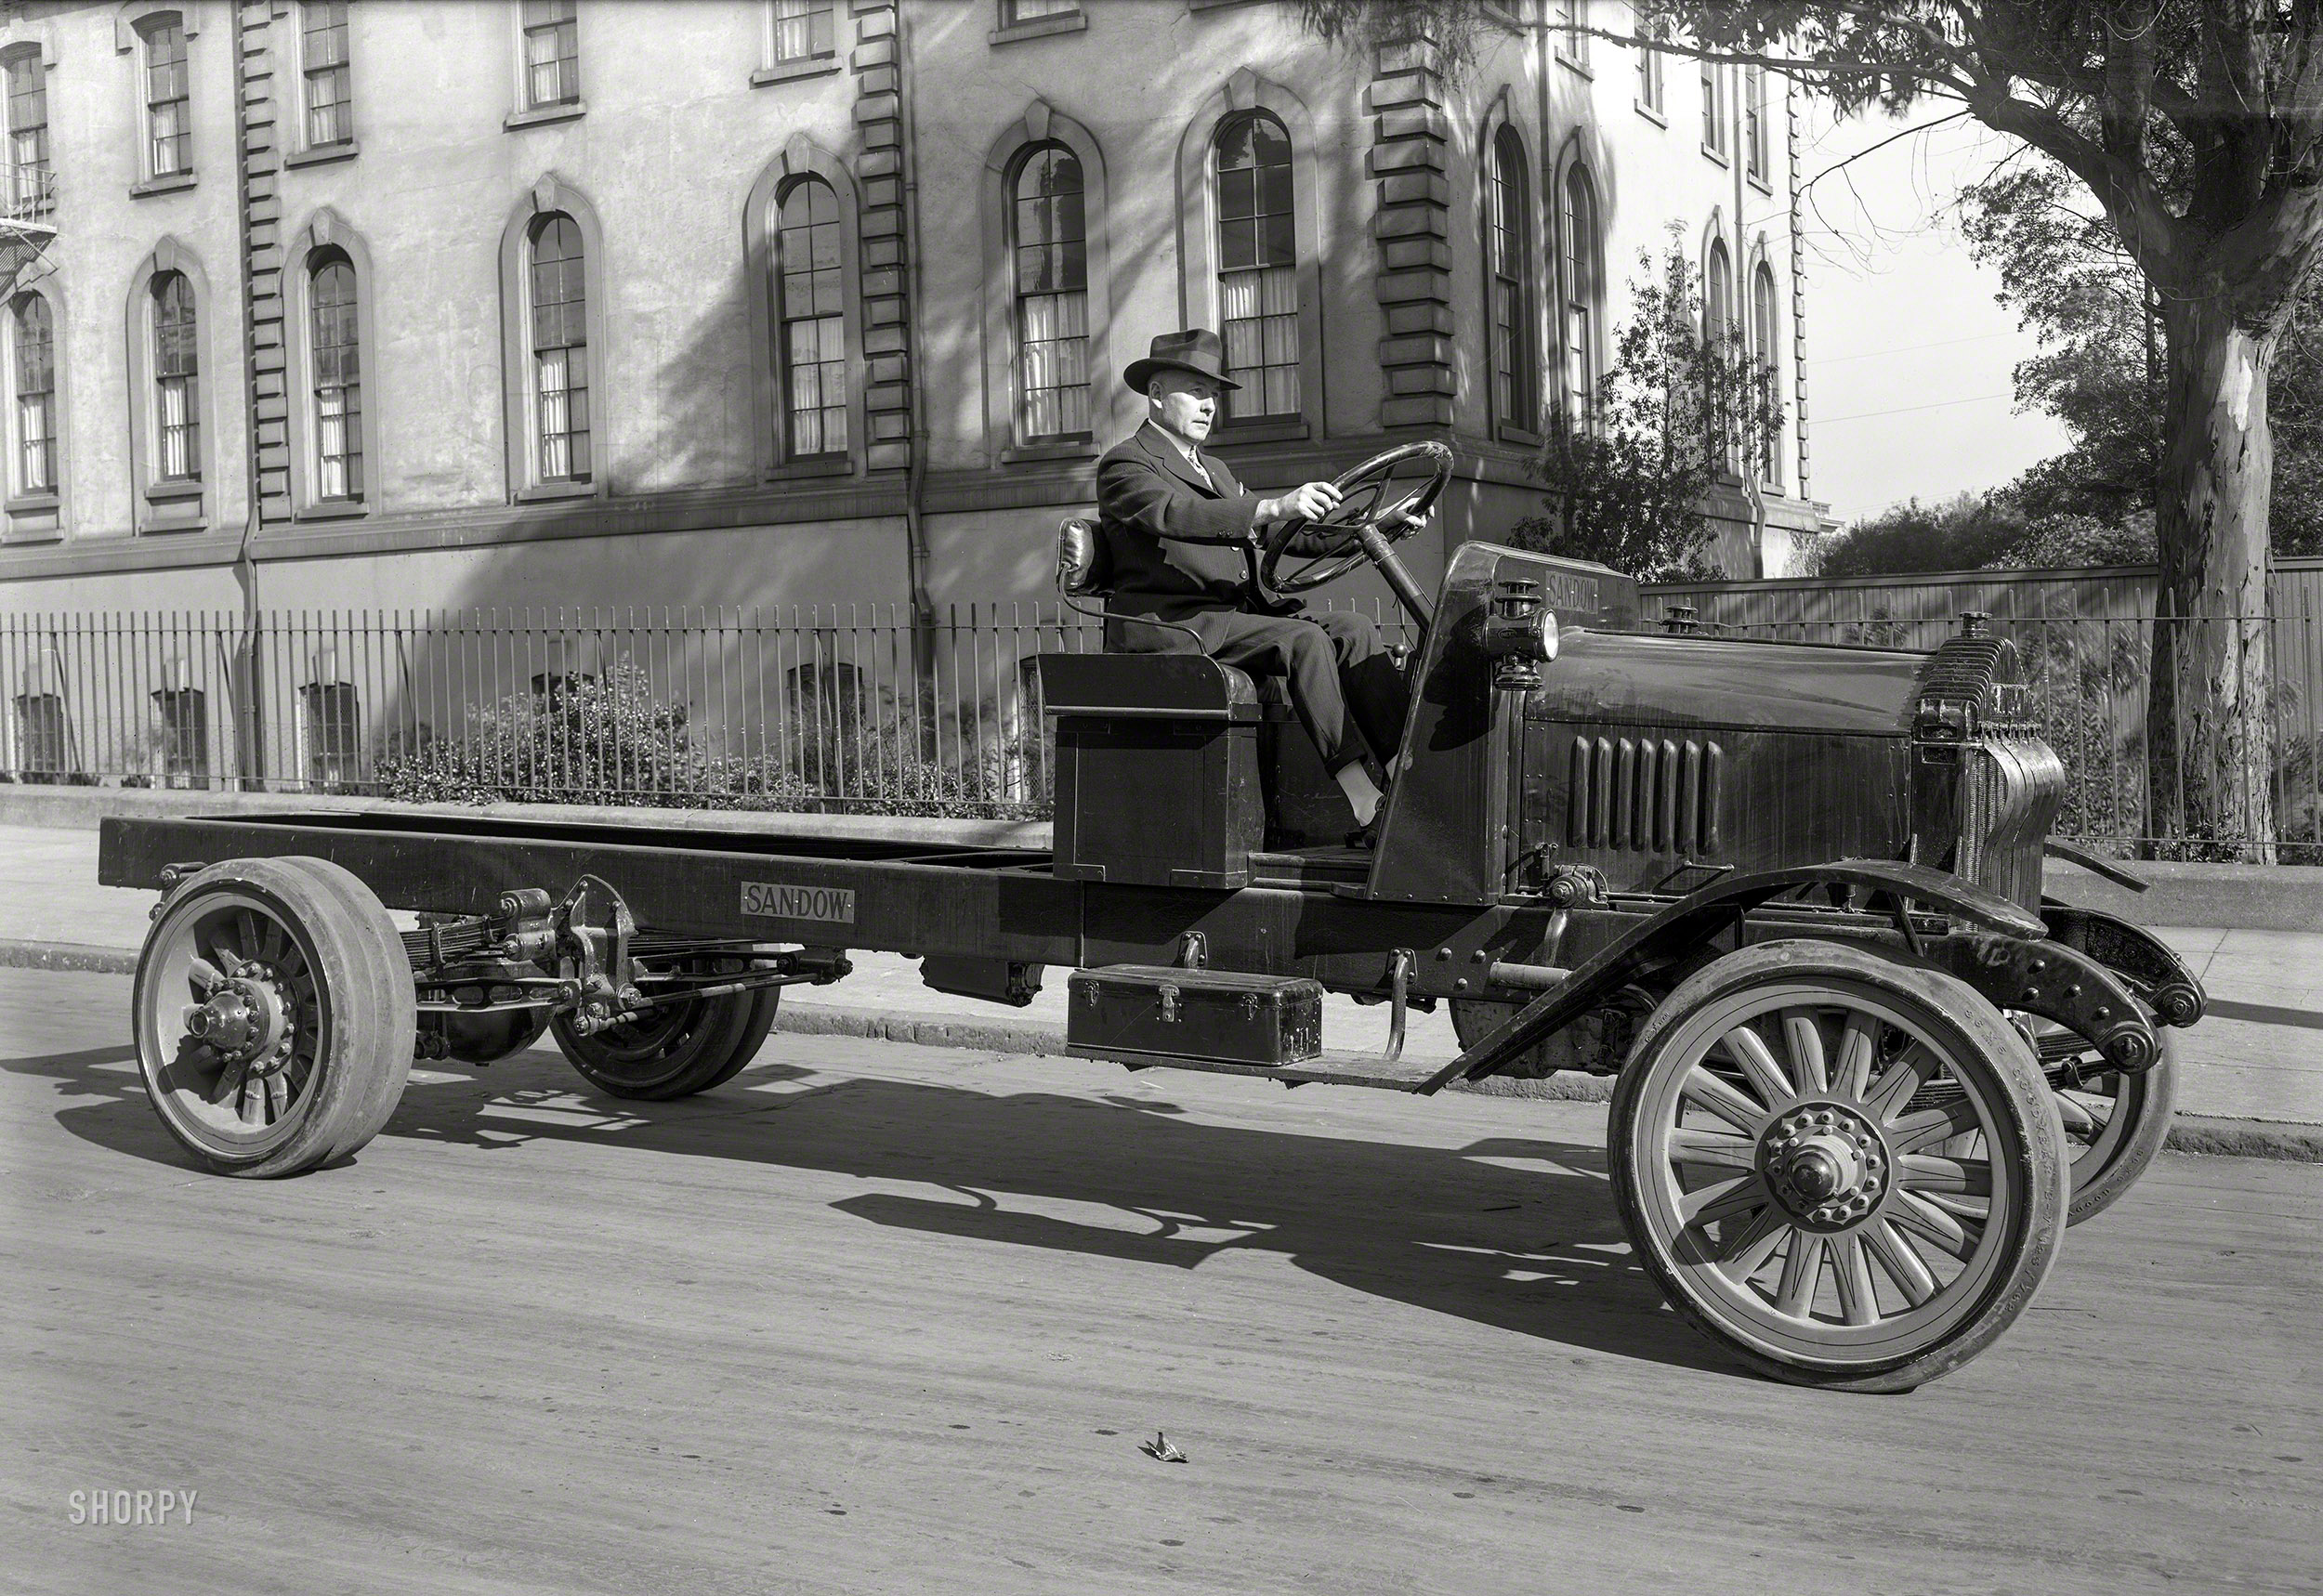 San Francisco circa 1919. "Sandow motor truck." Latest entry on the Shorpy List of Lapsed Lorries. 5x7 glass negative by Christopher Helin. View full size.